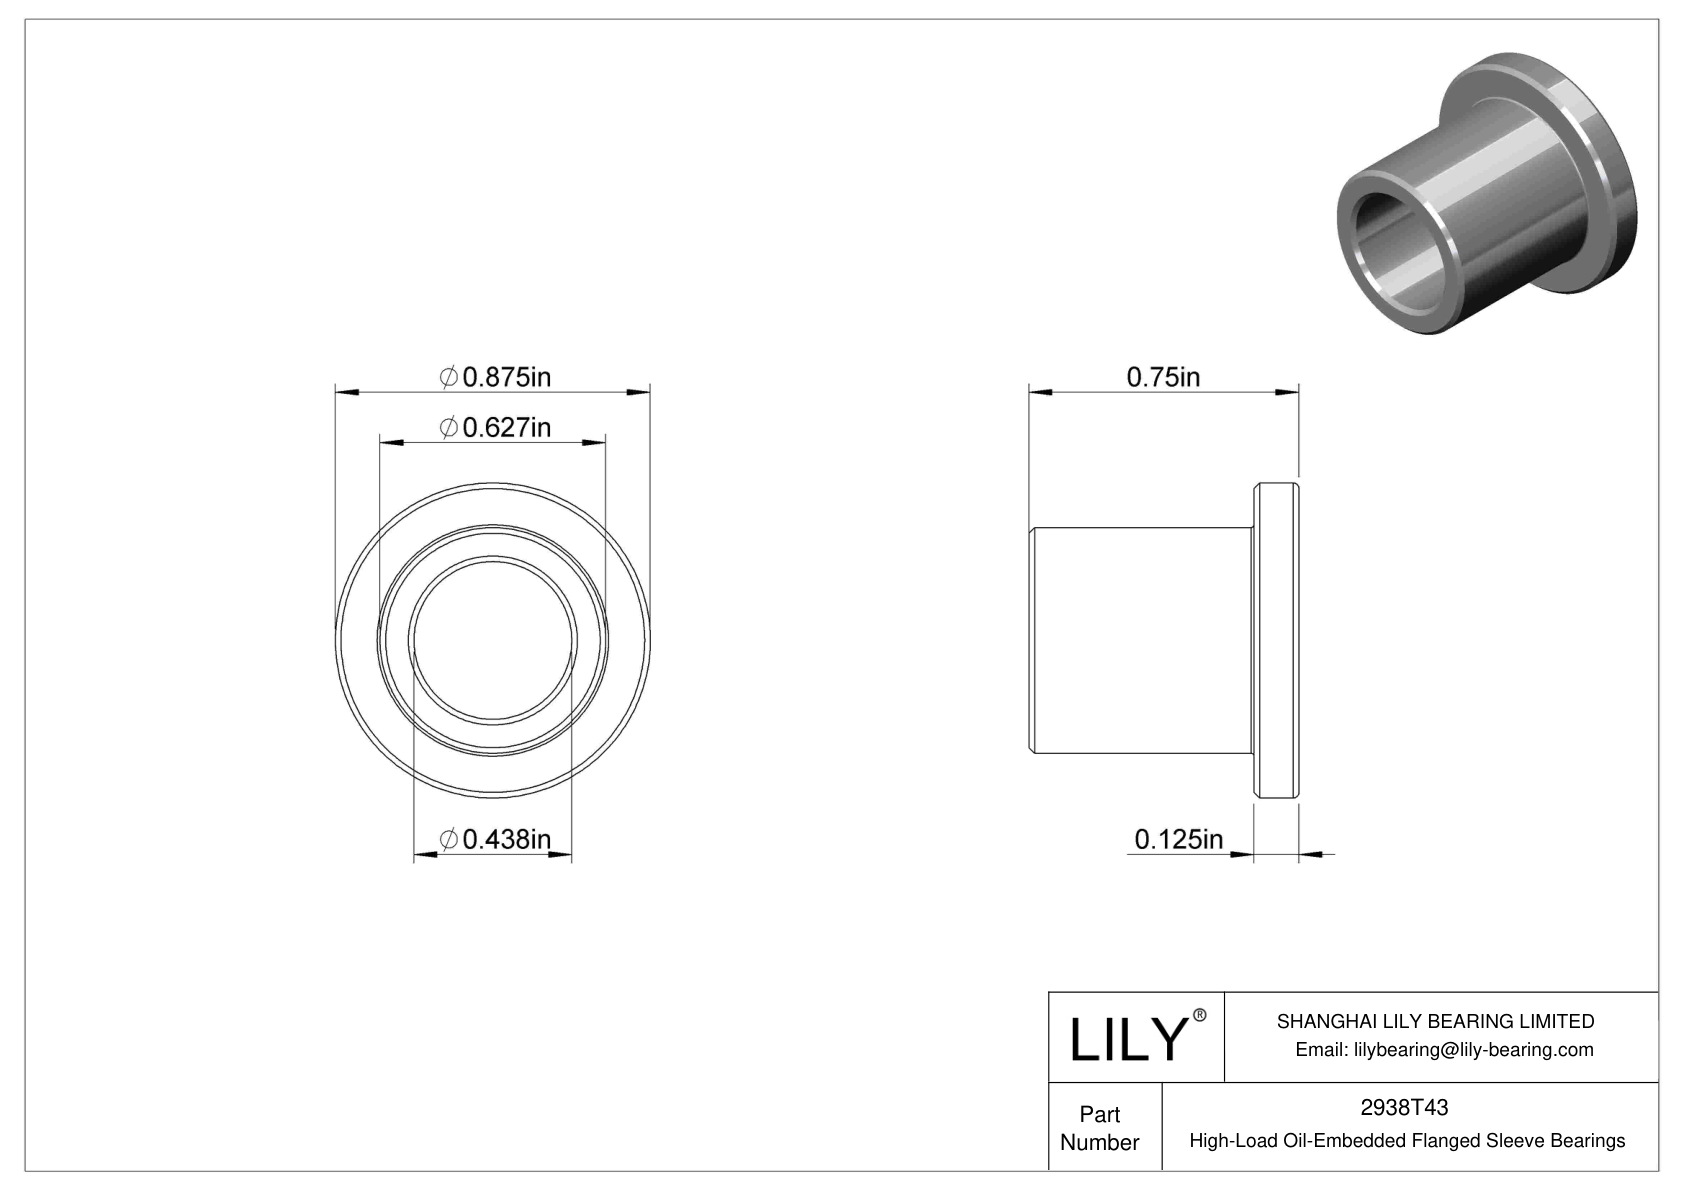 CJDITED High-Load Oil-Embedded Flanged Sleeve Bearings cad drawing